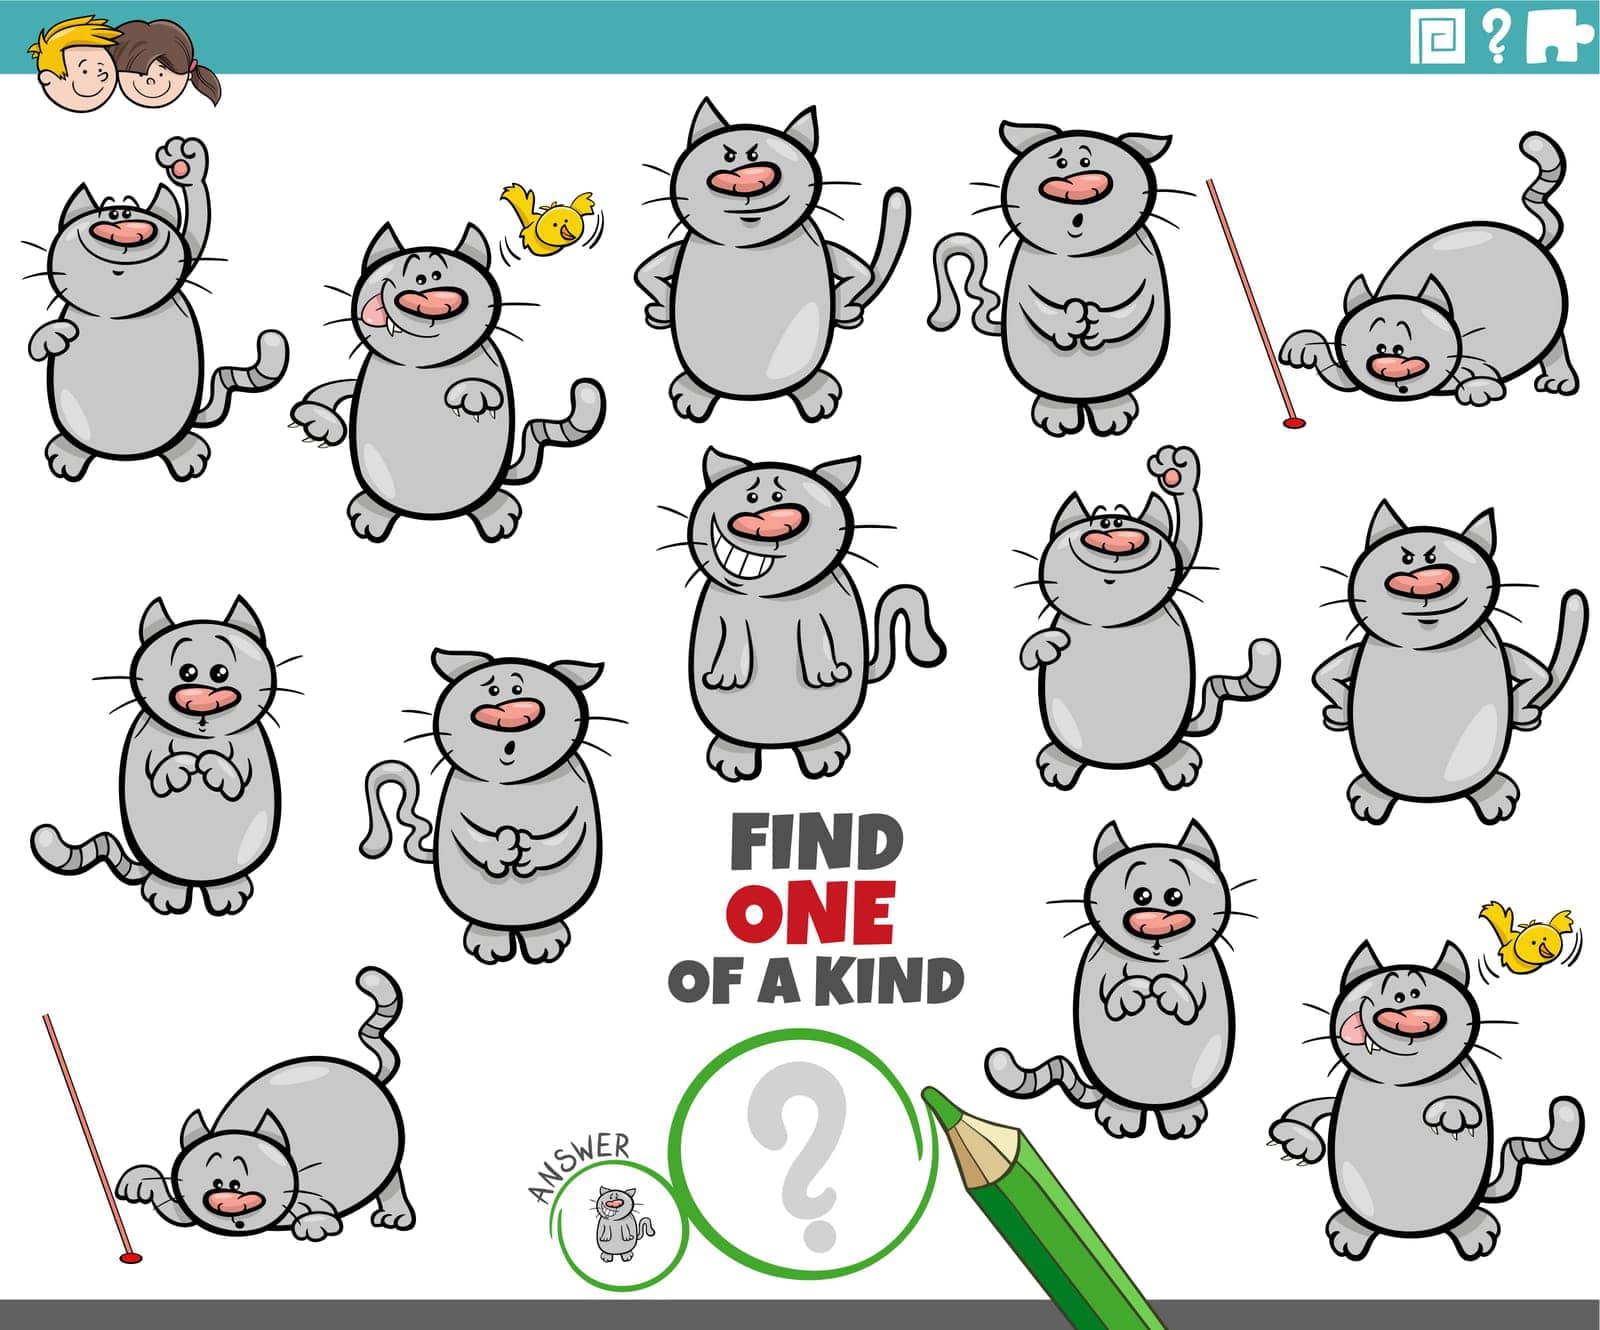 one of a kind game with funny cartoon cats and kittens by izakowski